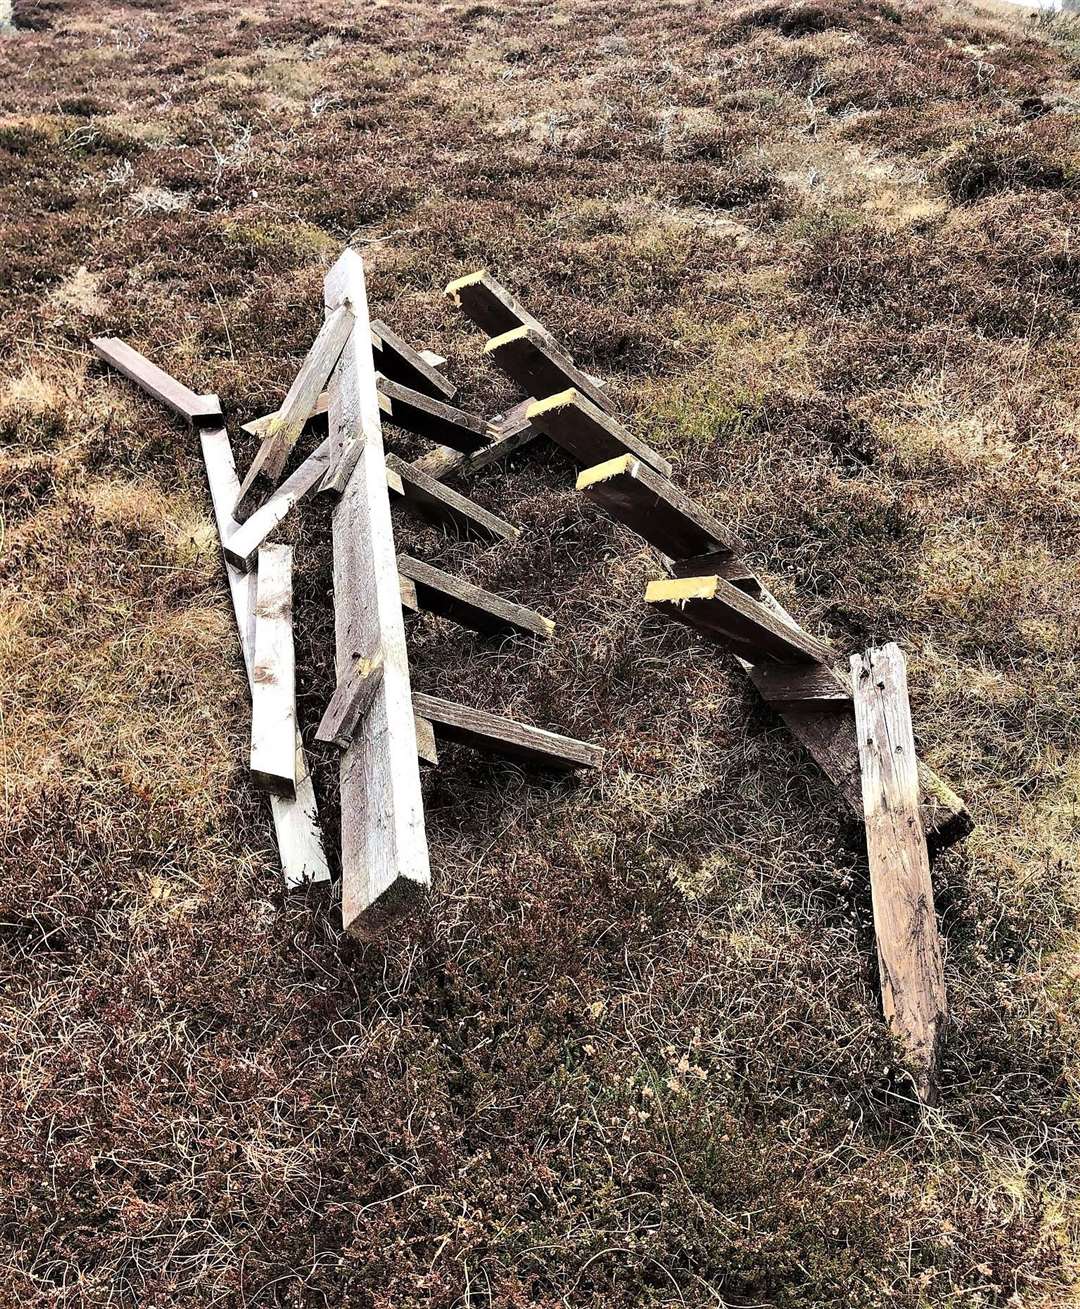 All the steps in this stile appear to be sawn through to make it unusable and beyond repair.